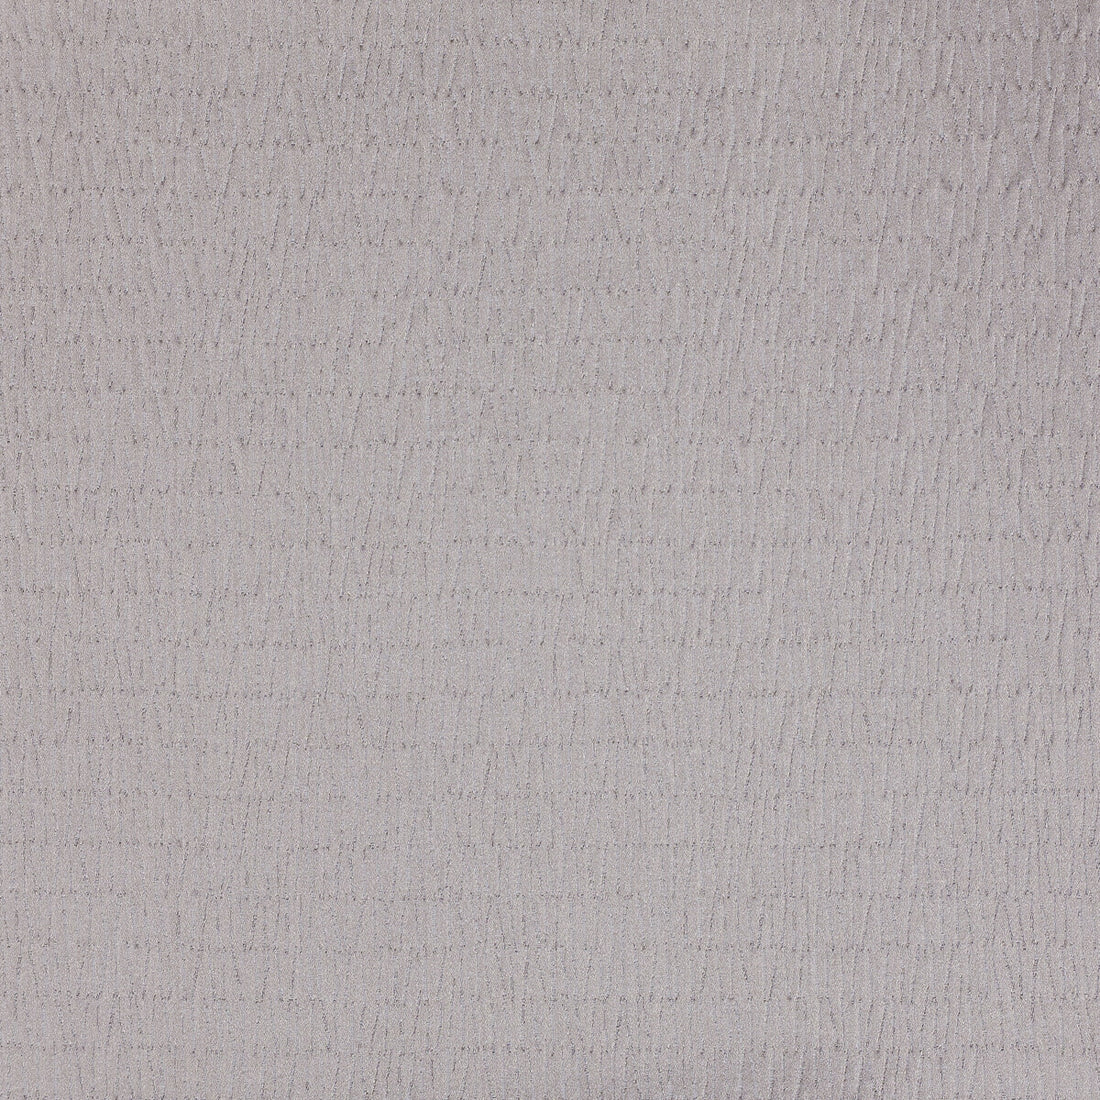 Earth fabric in 9 color - pattern LZ-30217.09.0 - by Kravet Design in the Lizzo collection